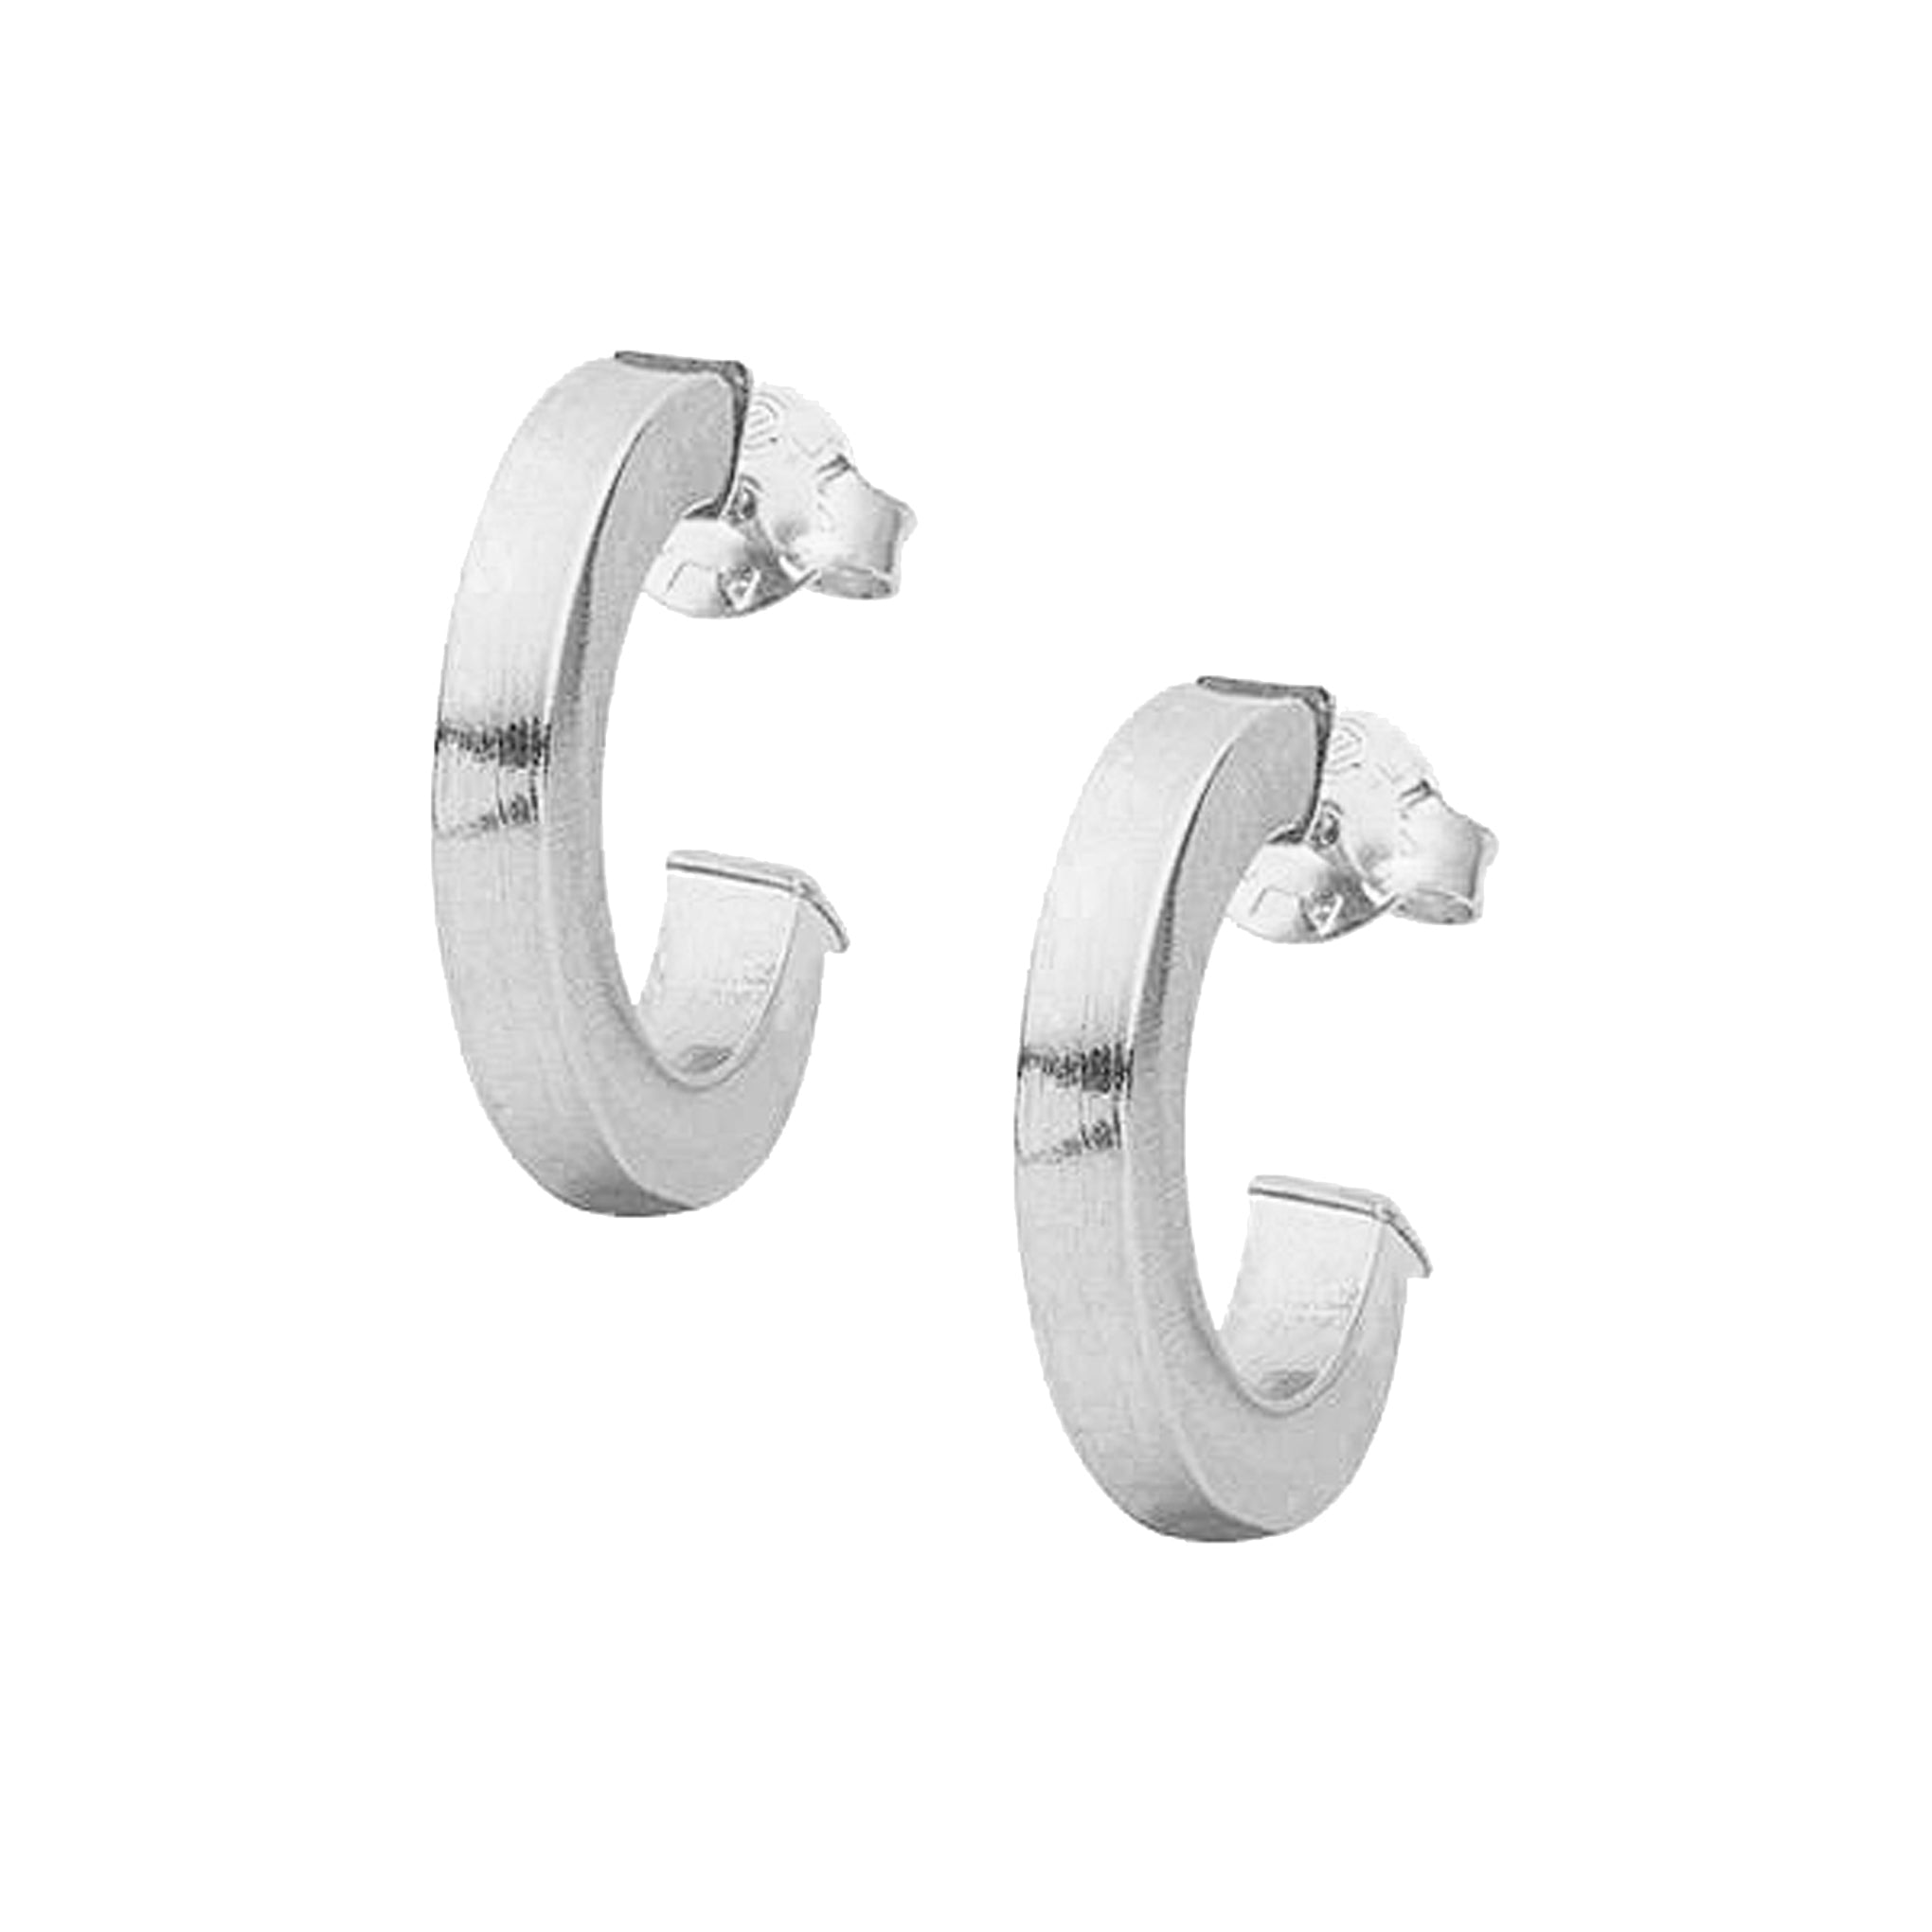 Sheila Fajl Bianca Petite Square Styled Hoop Earrings in Brushed Silver Plated